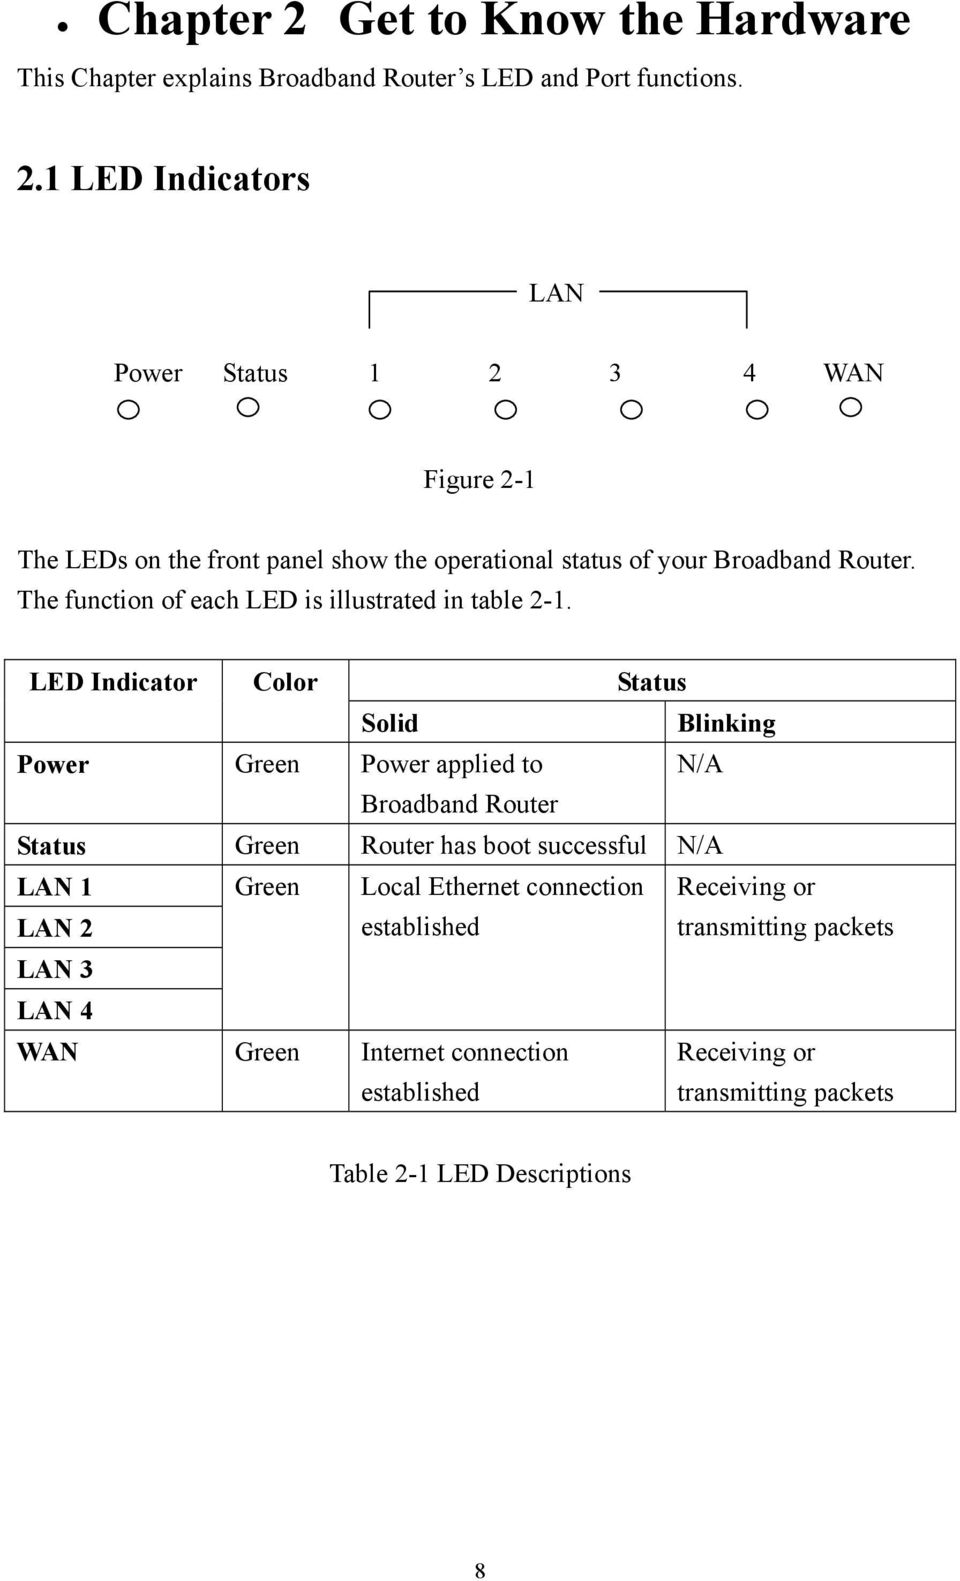 LED Indicator Color Status Solid Blinking Power Green Power applied to N/A Broadband Router Status Green Router has boot successful N/A LAN 1 LAN 2 Green Local